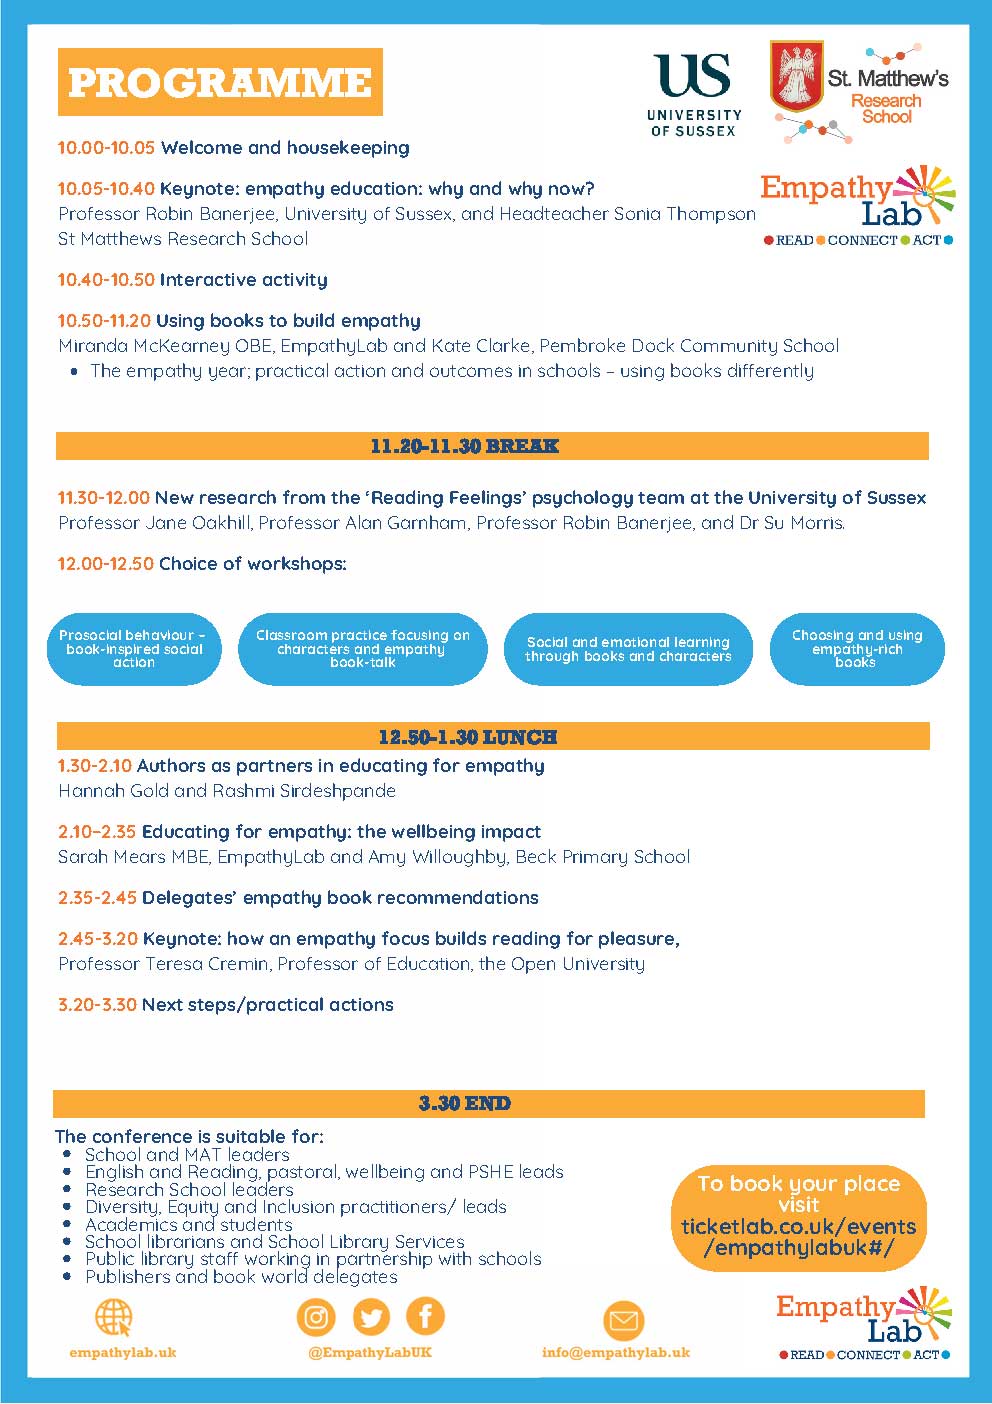 Educating for Empathy - Empathy Lab conference programme